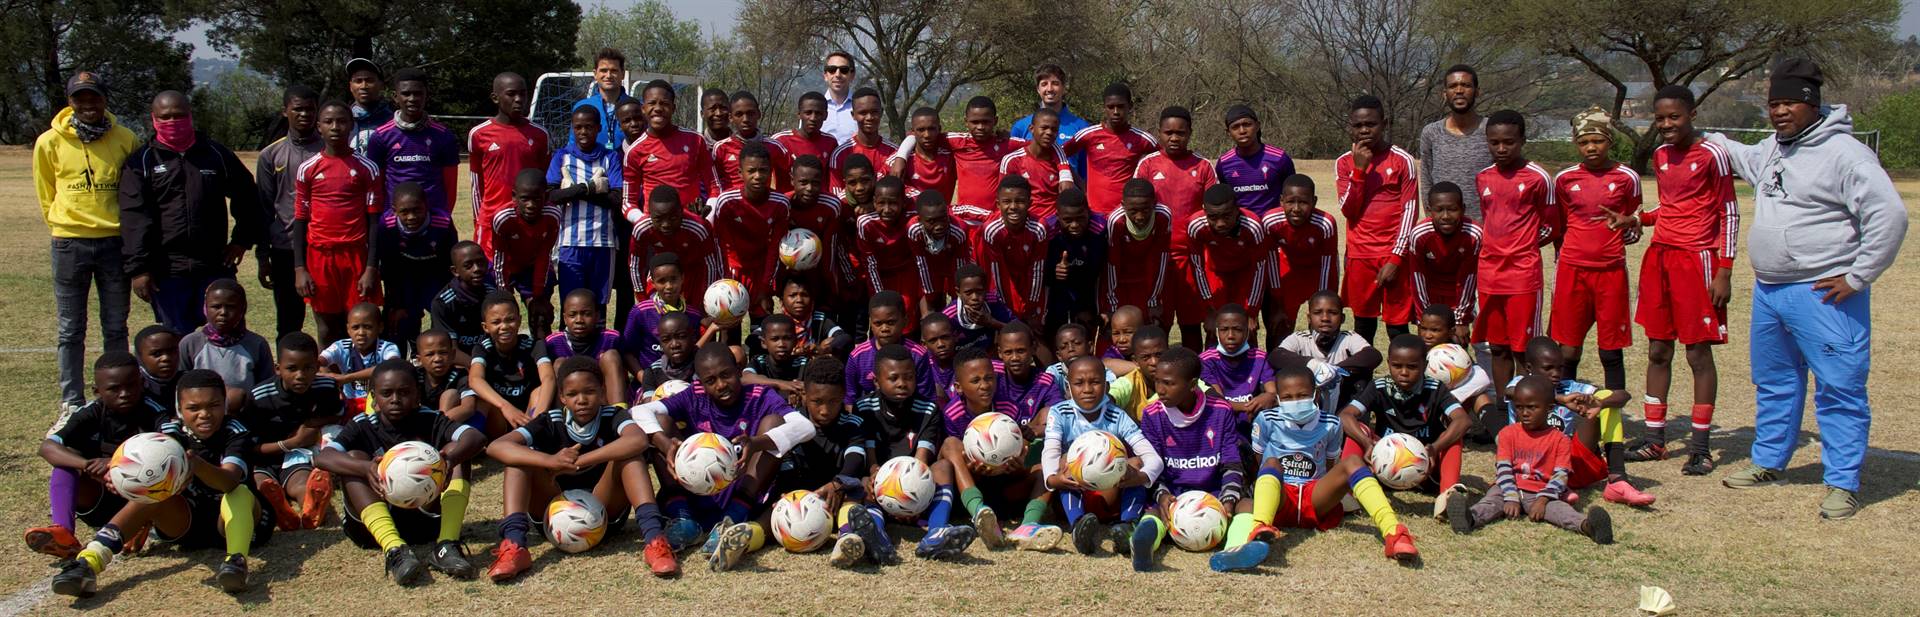 Celta Vigor FC players from Evaton in Emfuleni were invited to a private coaching clinic with LaLiga coaches. Photo: LaLiga SA